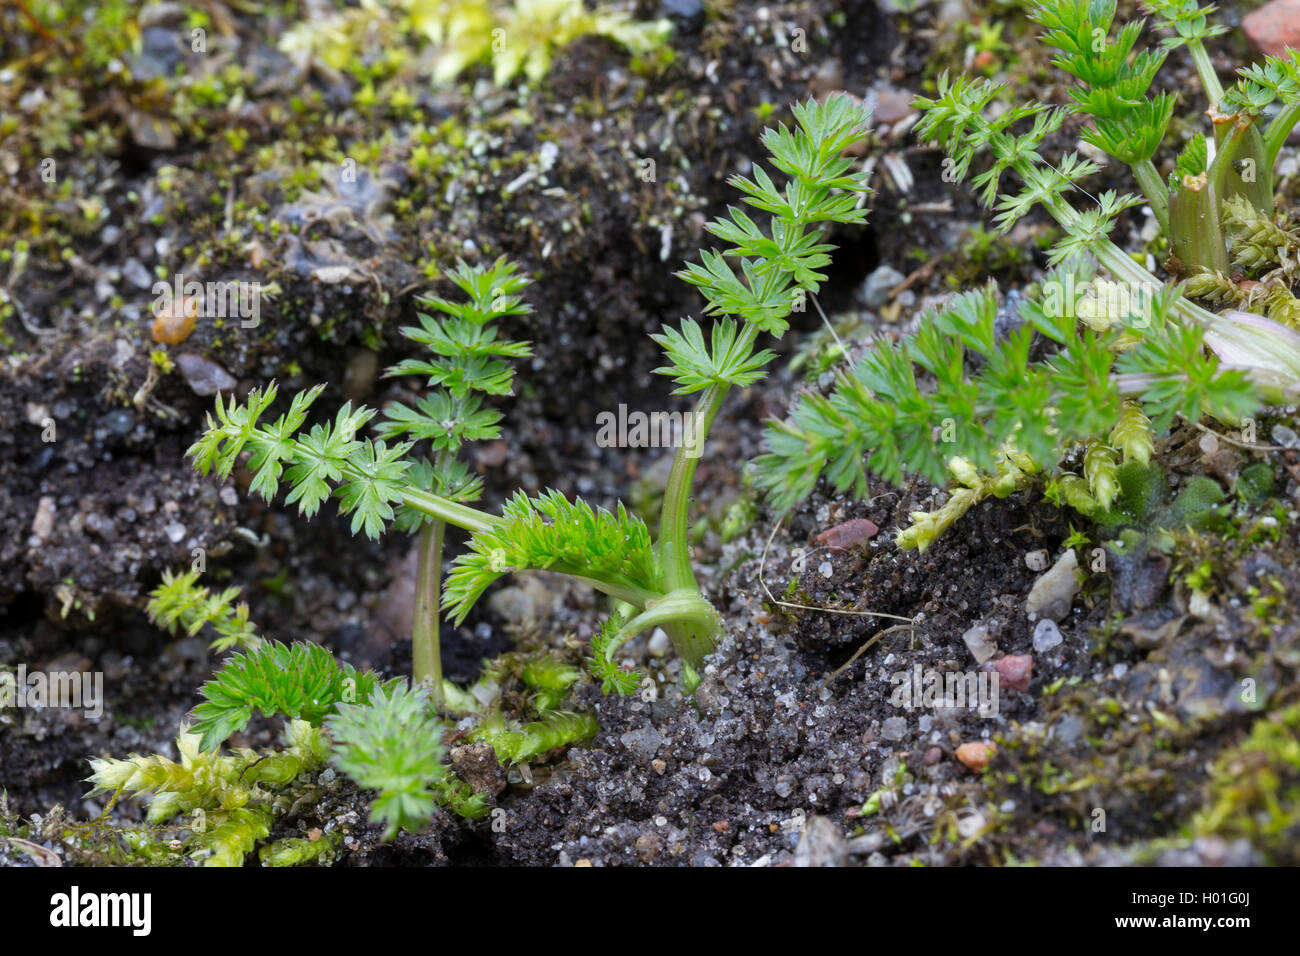 common caraway (Carum carvi), young leaves, Germany Stock Photo